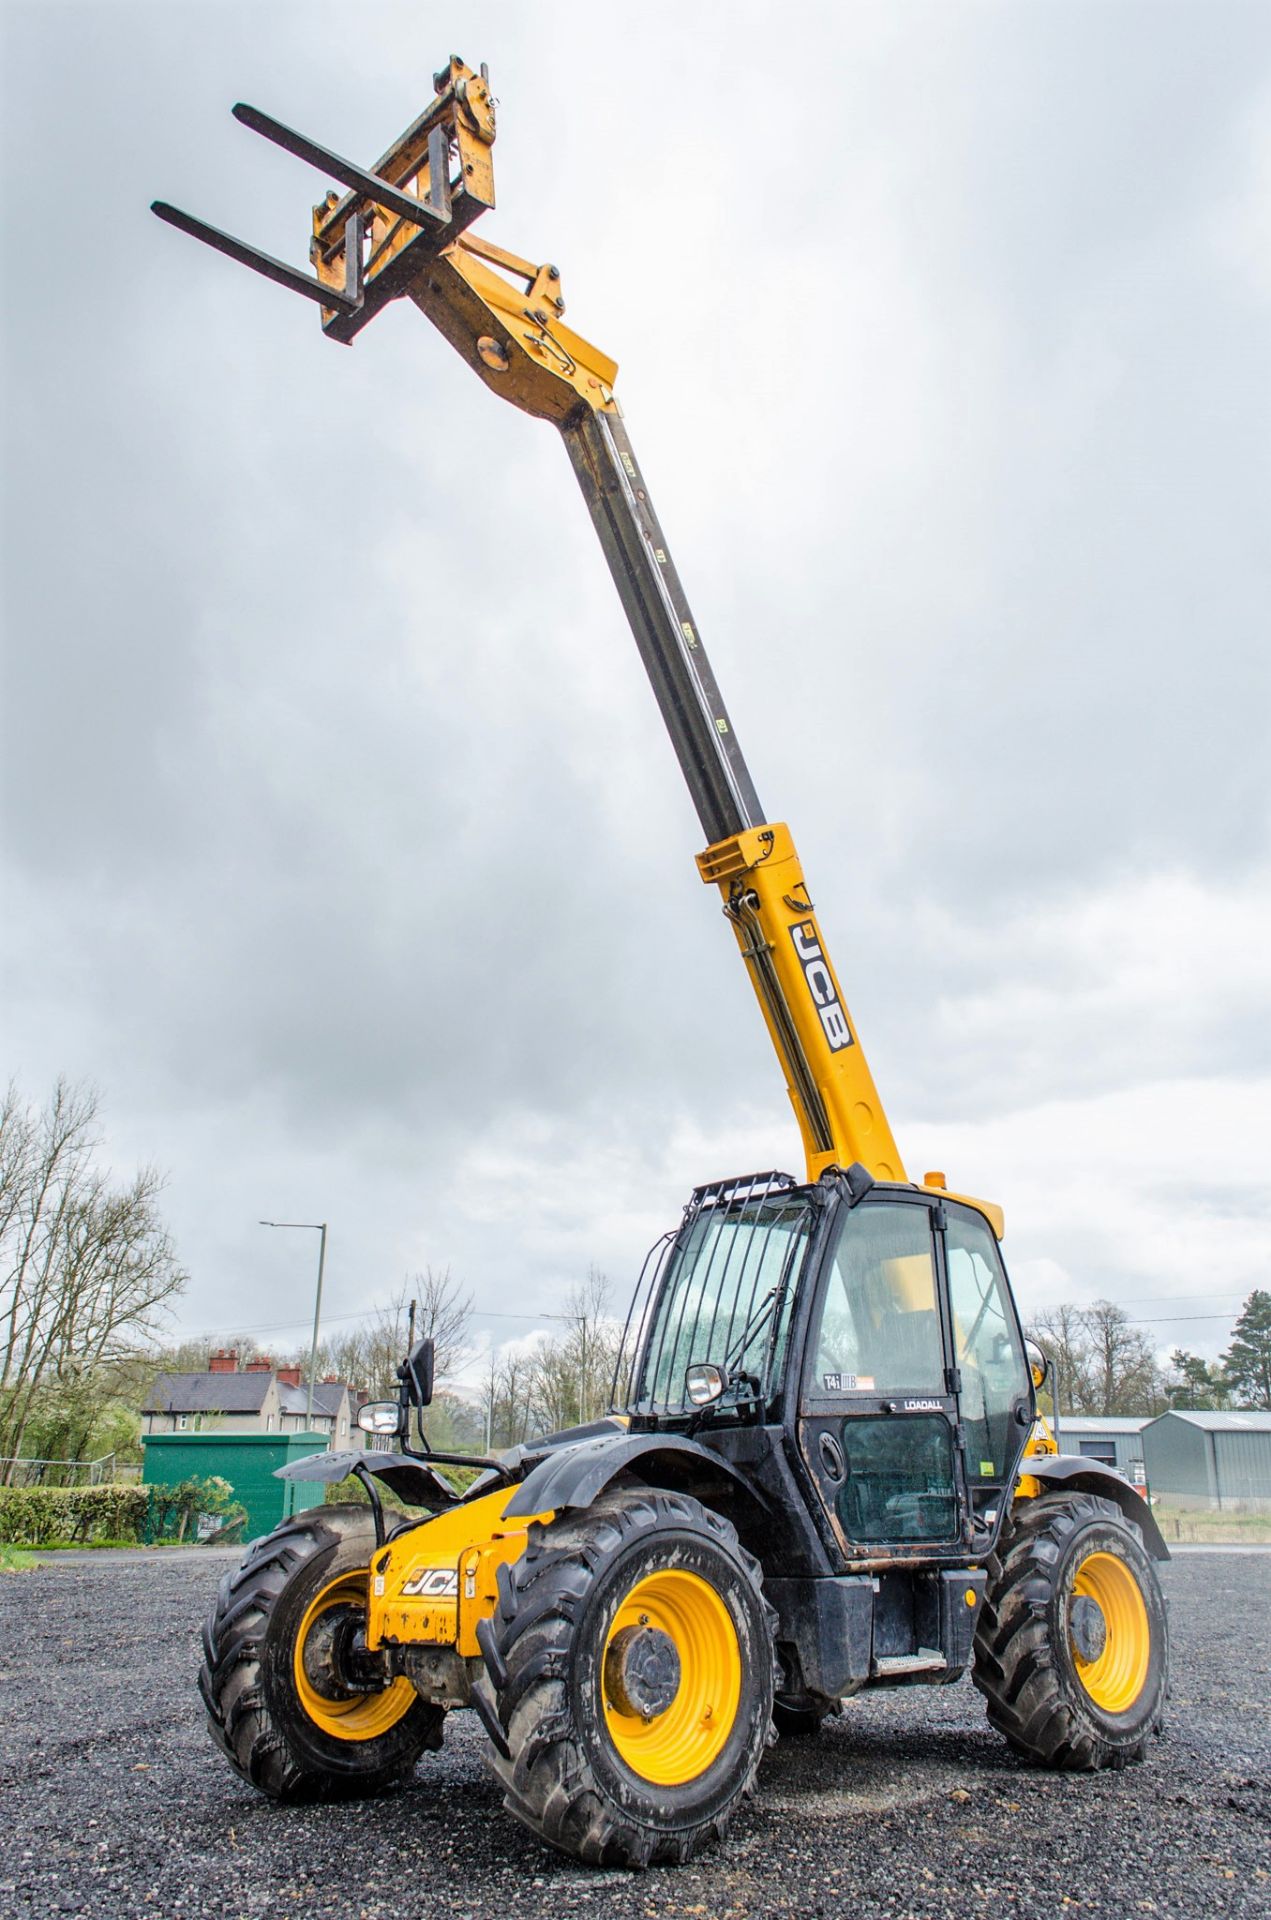 JCB 531-70 7 metre telescopic handler Year: S/N: 2352838 Recorded Hours: 3281 THO70012 - Image 9 of 21